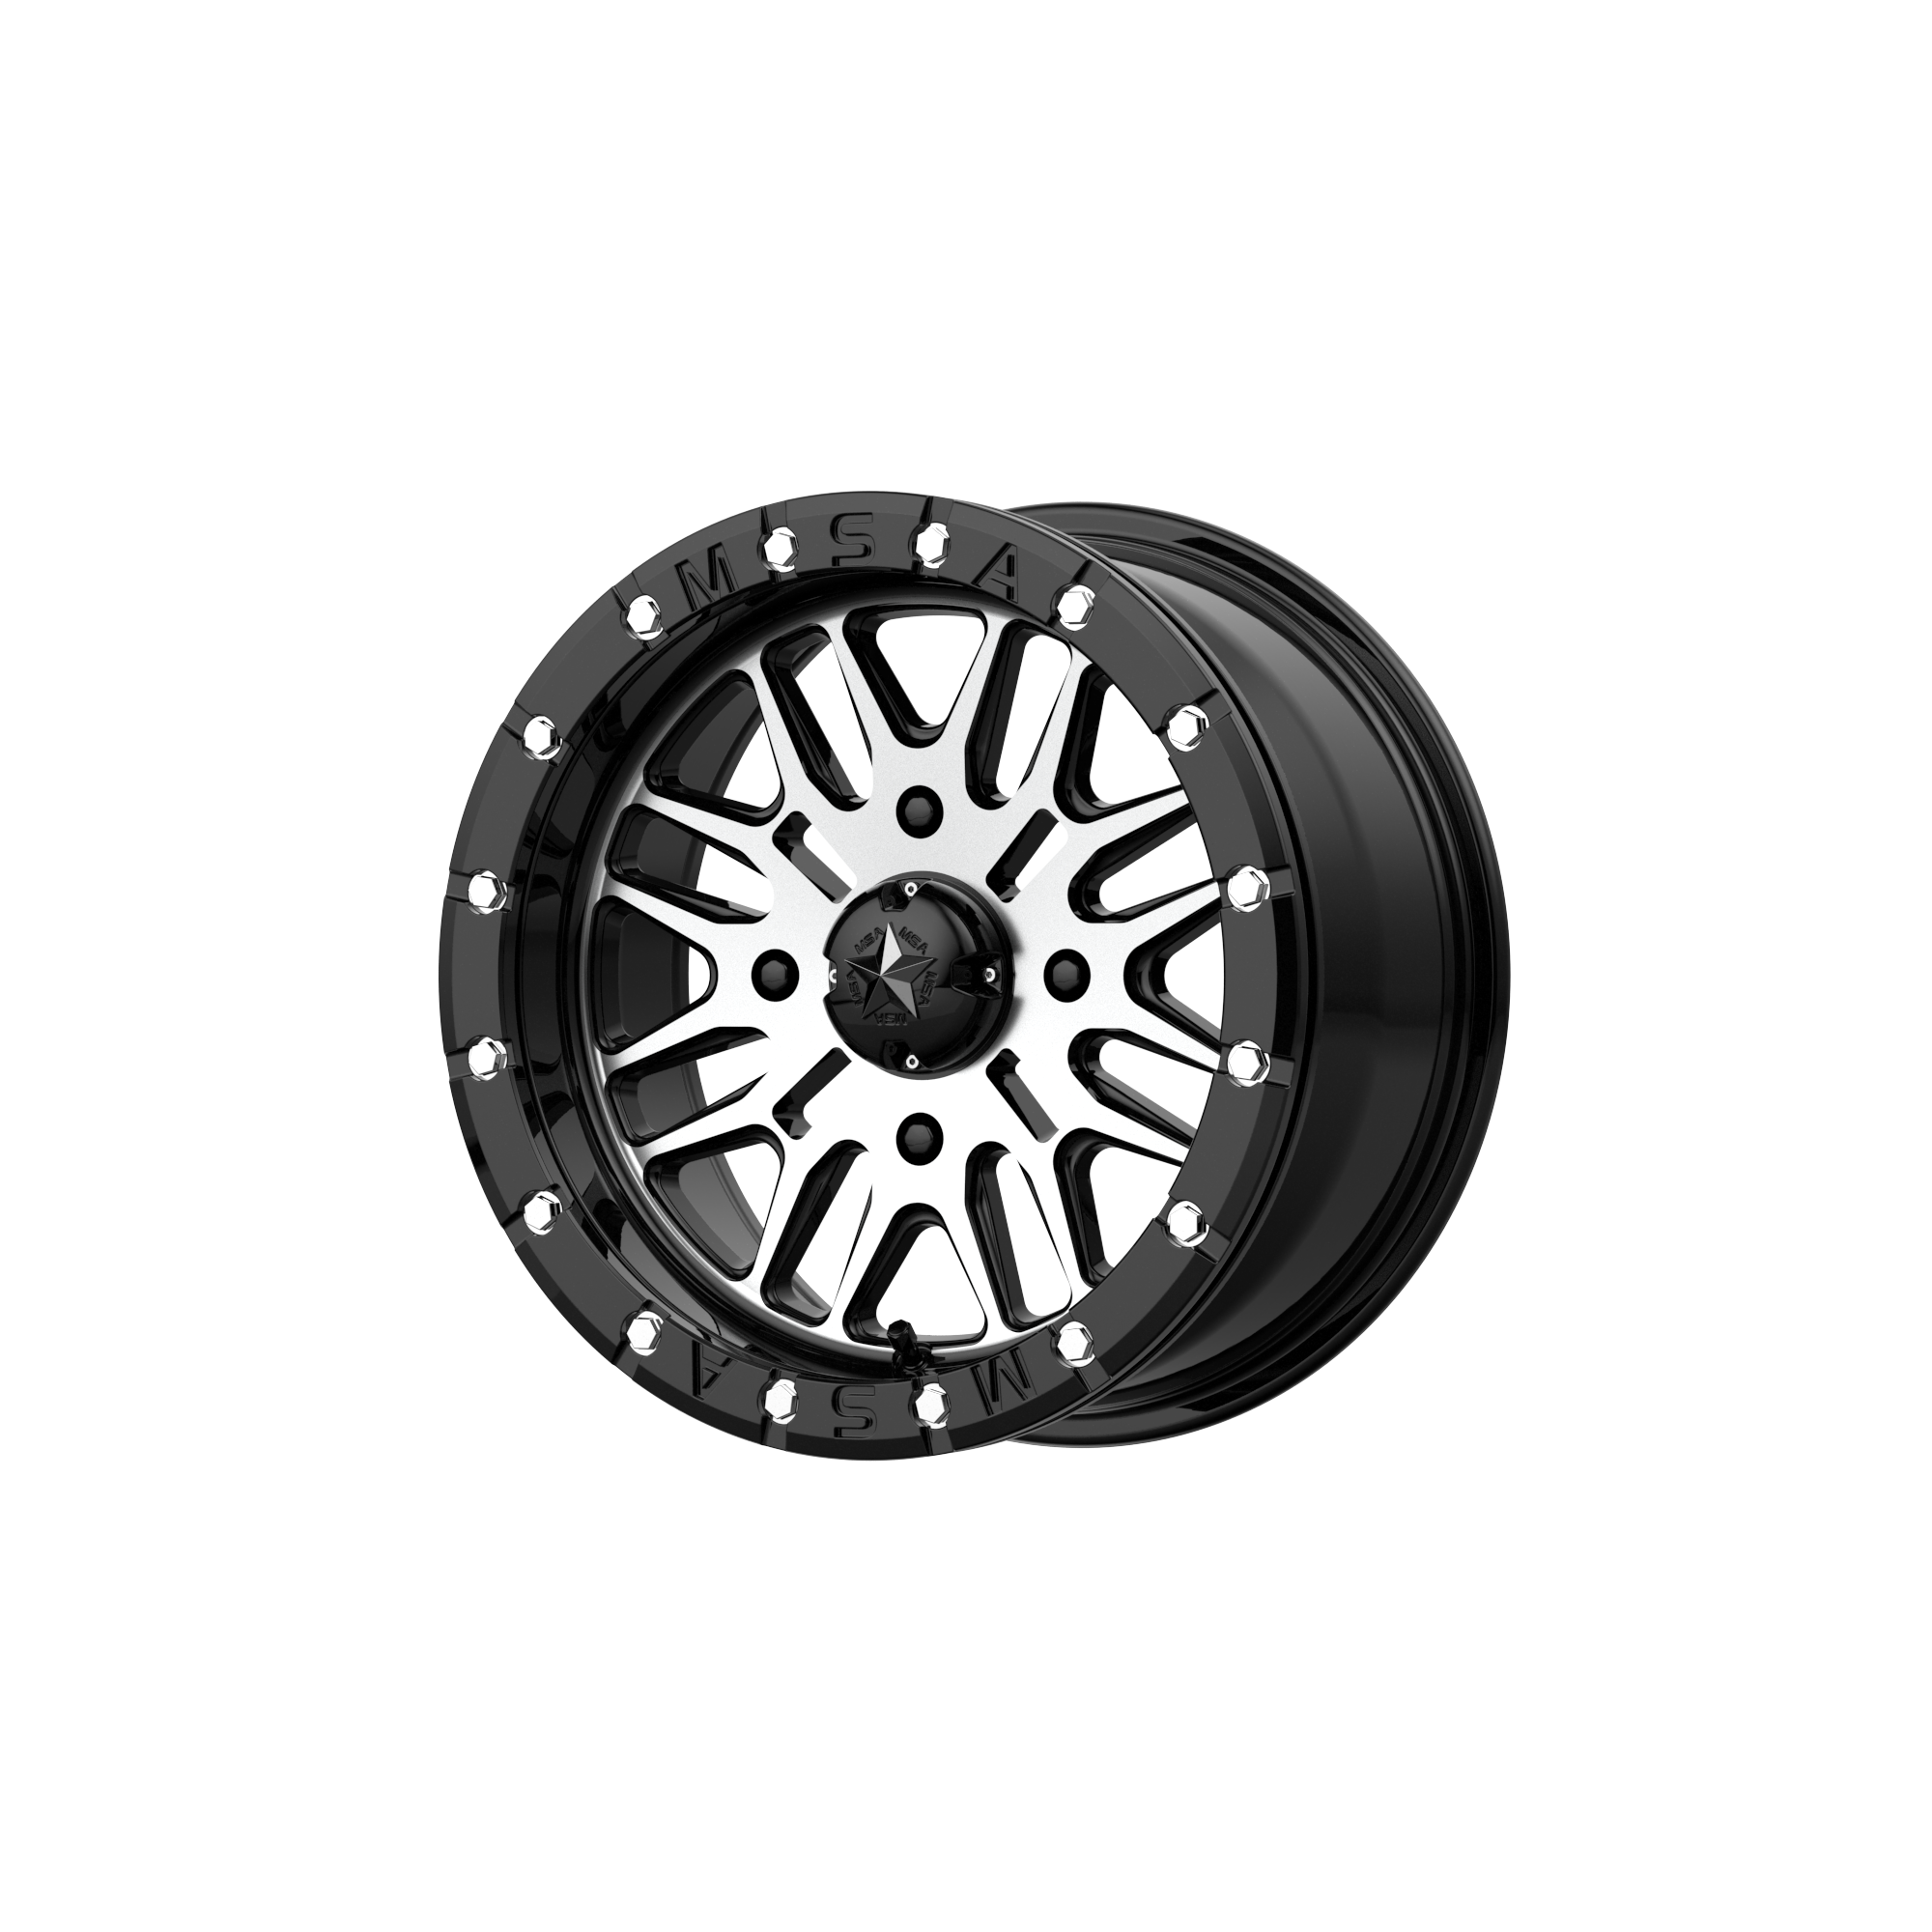 BRUTE BEADLOCK 15x7 4x137.00 GLOSS BLACK MACHINED (10 mm) - Tires and Engine Performance